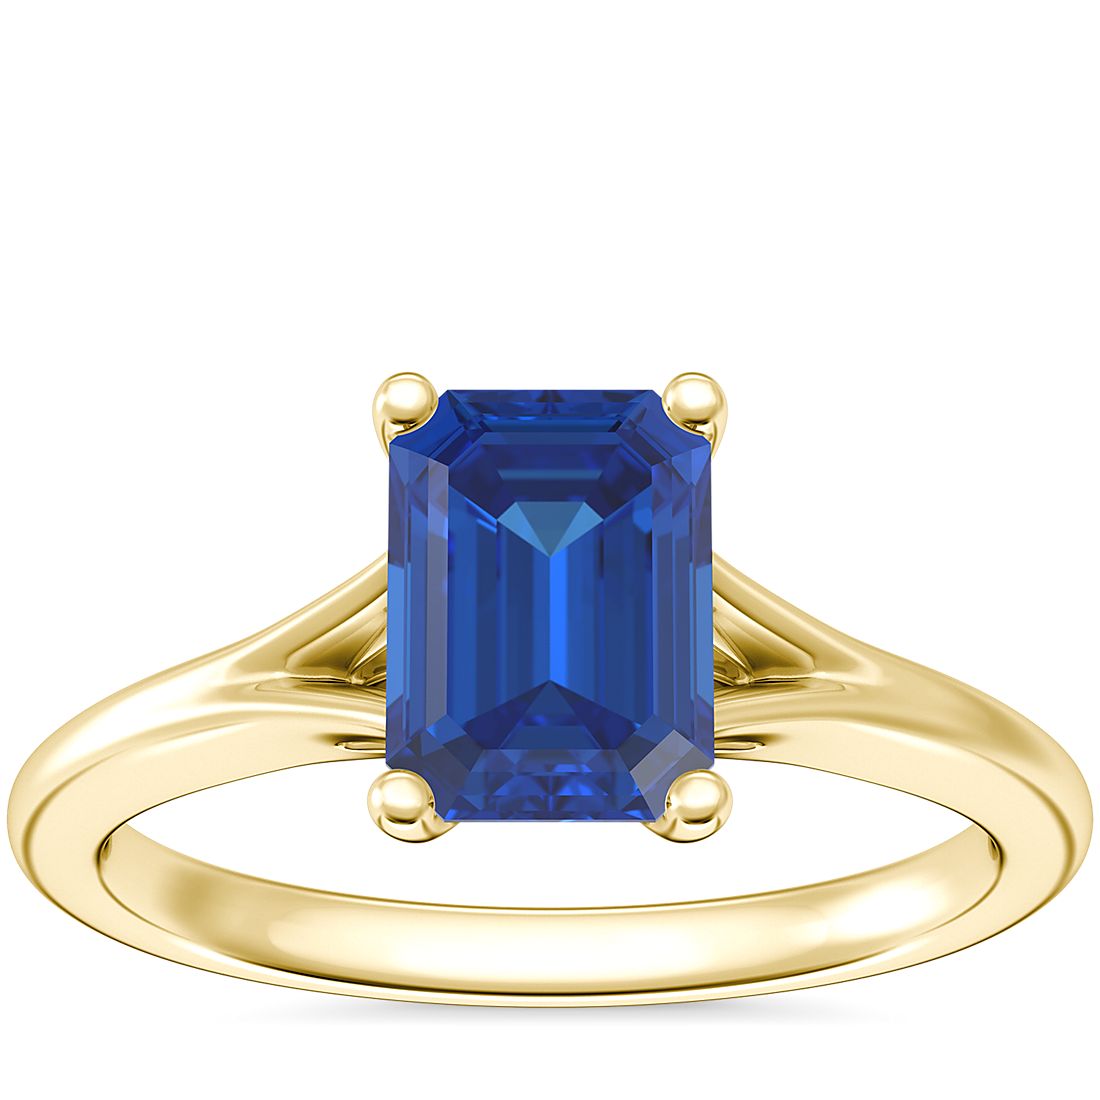 Petite Split Shank Solitaire Engagement Ring with Emerald-Cut Sapphire in 18k Yellow Gold (7x5mm)